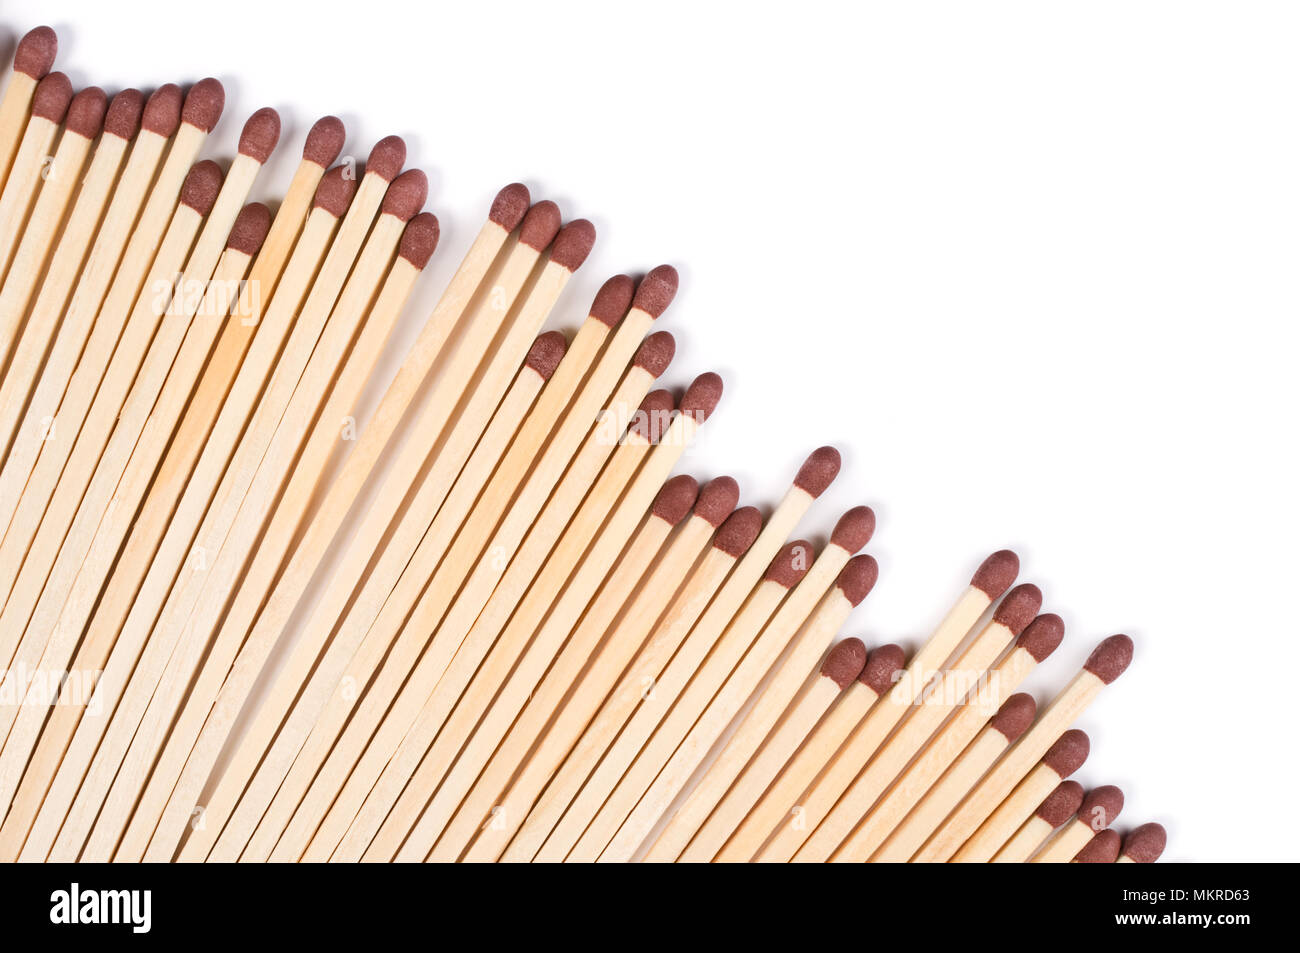 Matches in a row on white background. Stock Photo